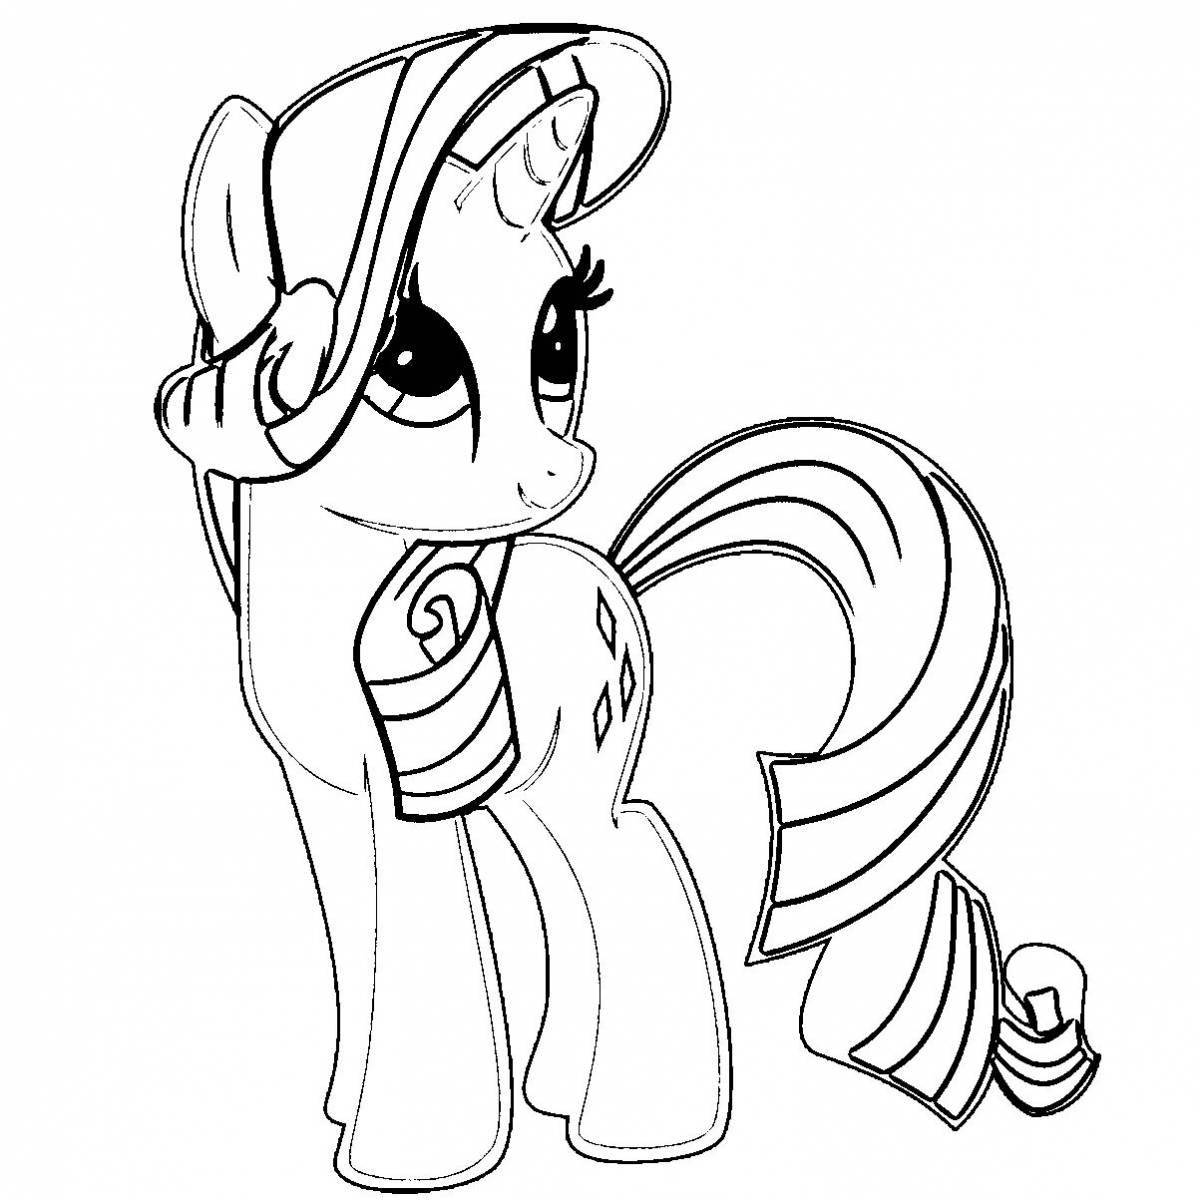 Charming coloring my favorite pony